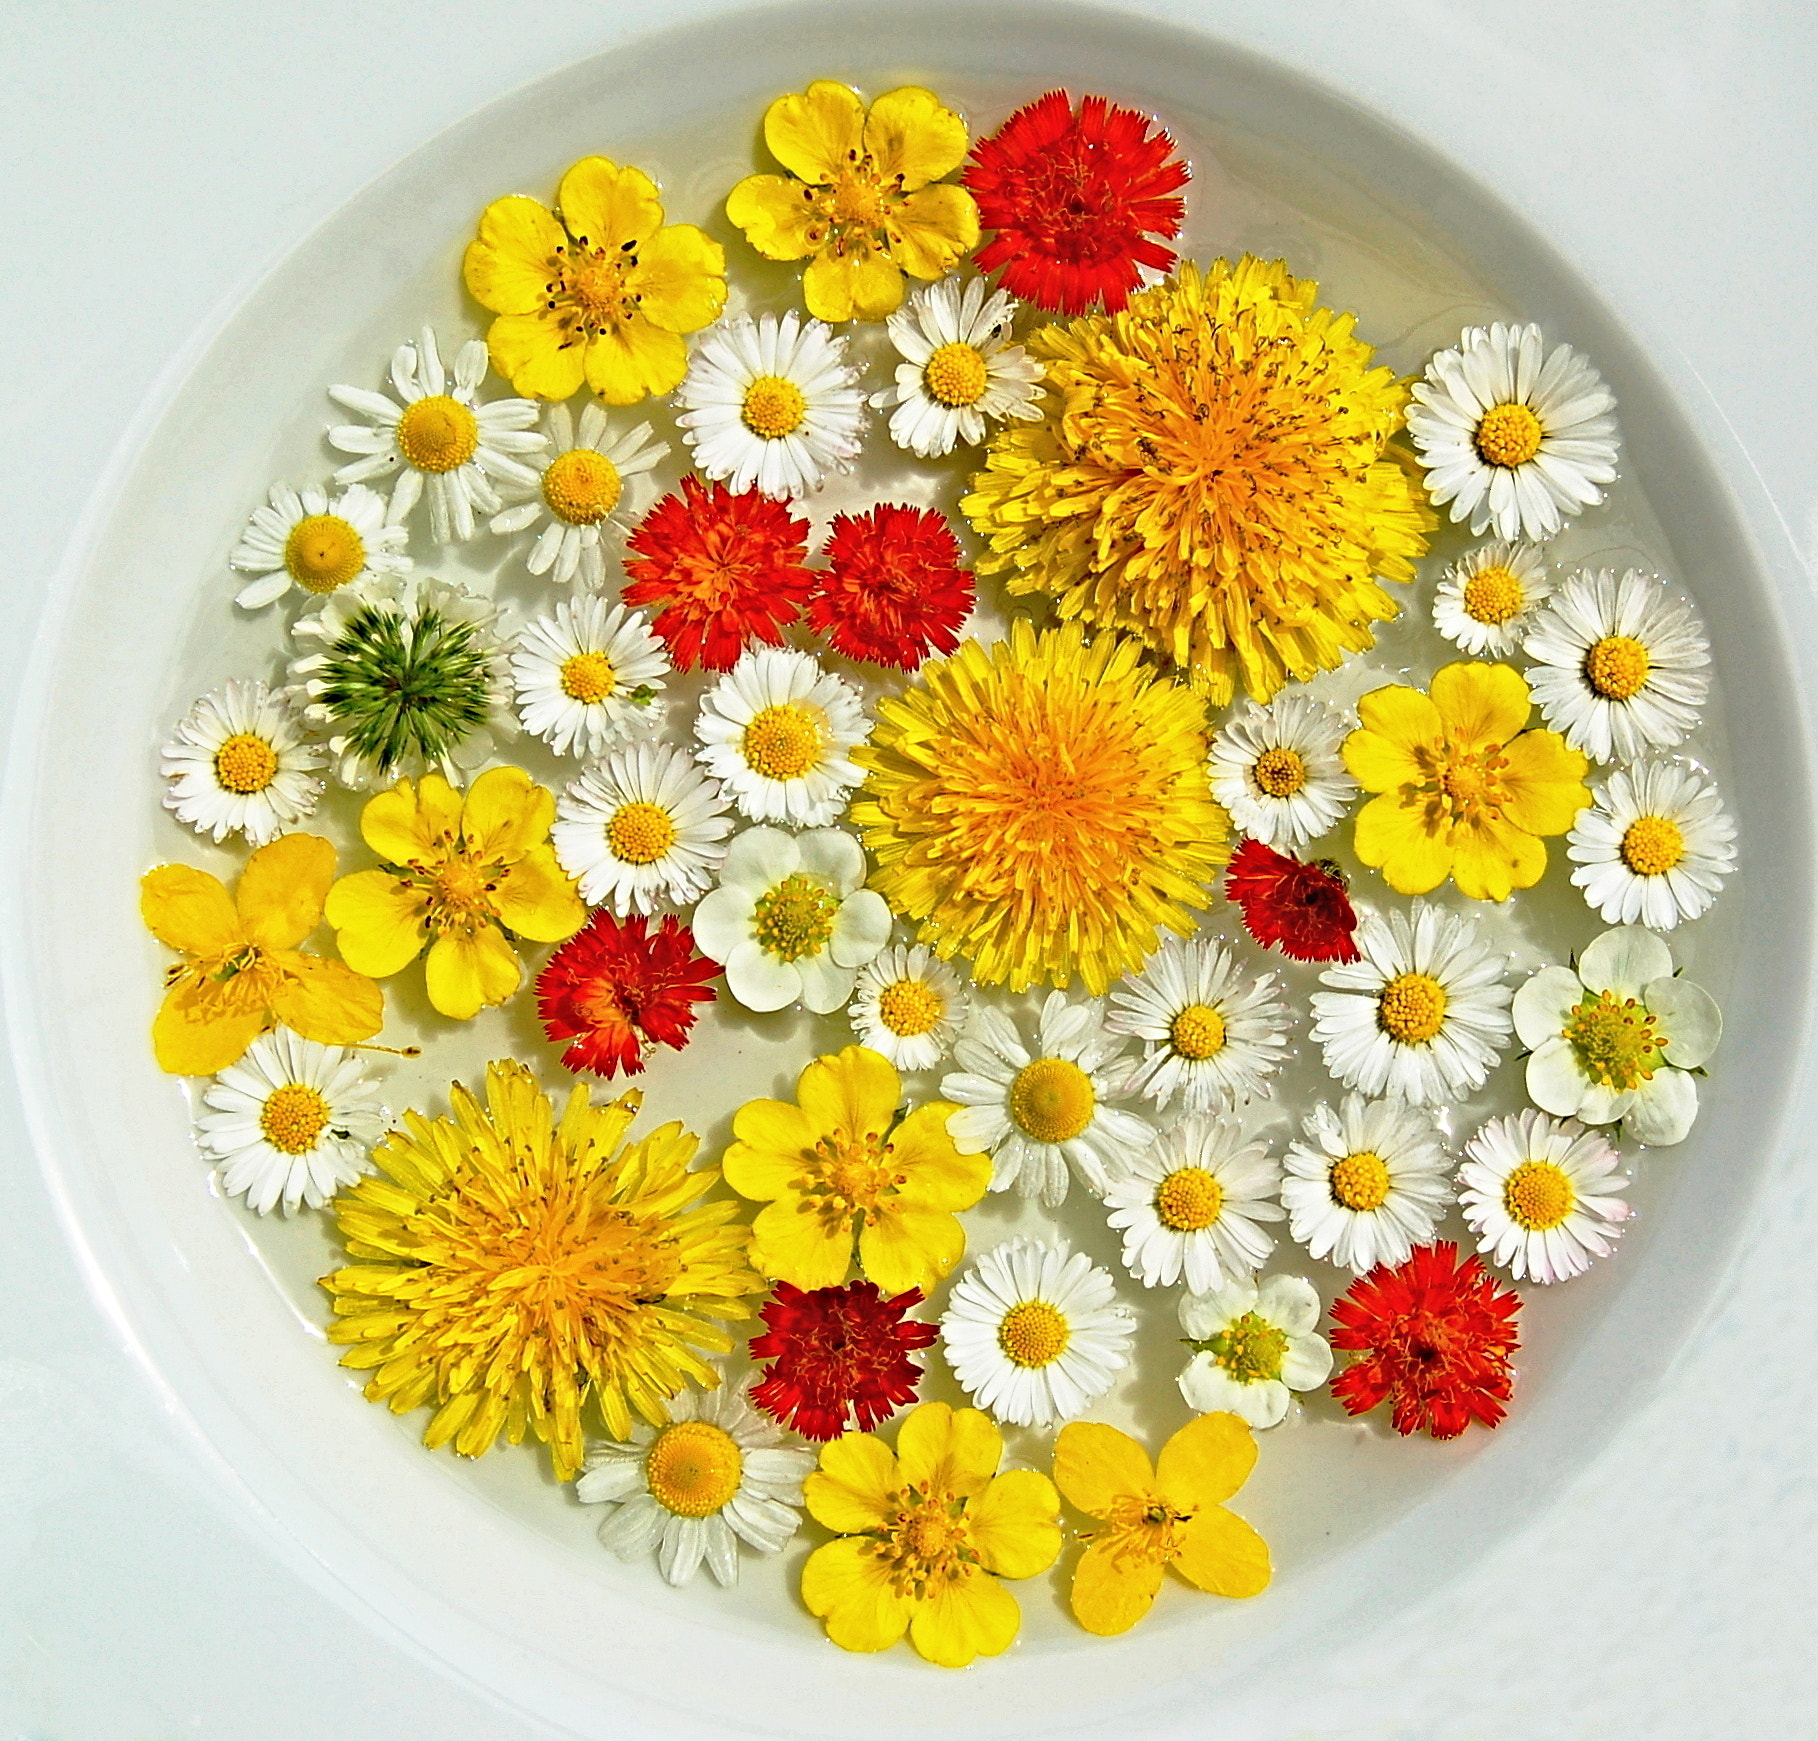 Nikon D50 sample photo. Soup of field flowers photography